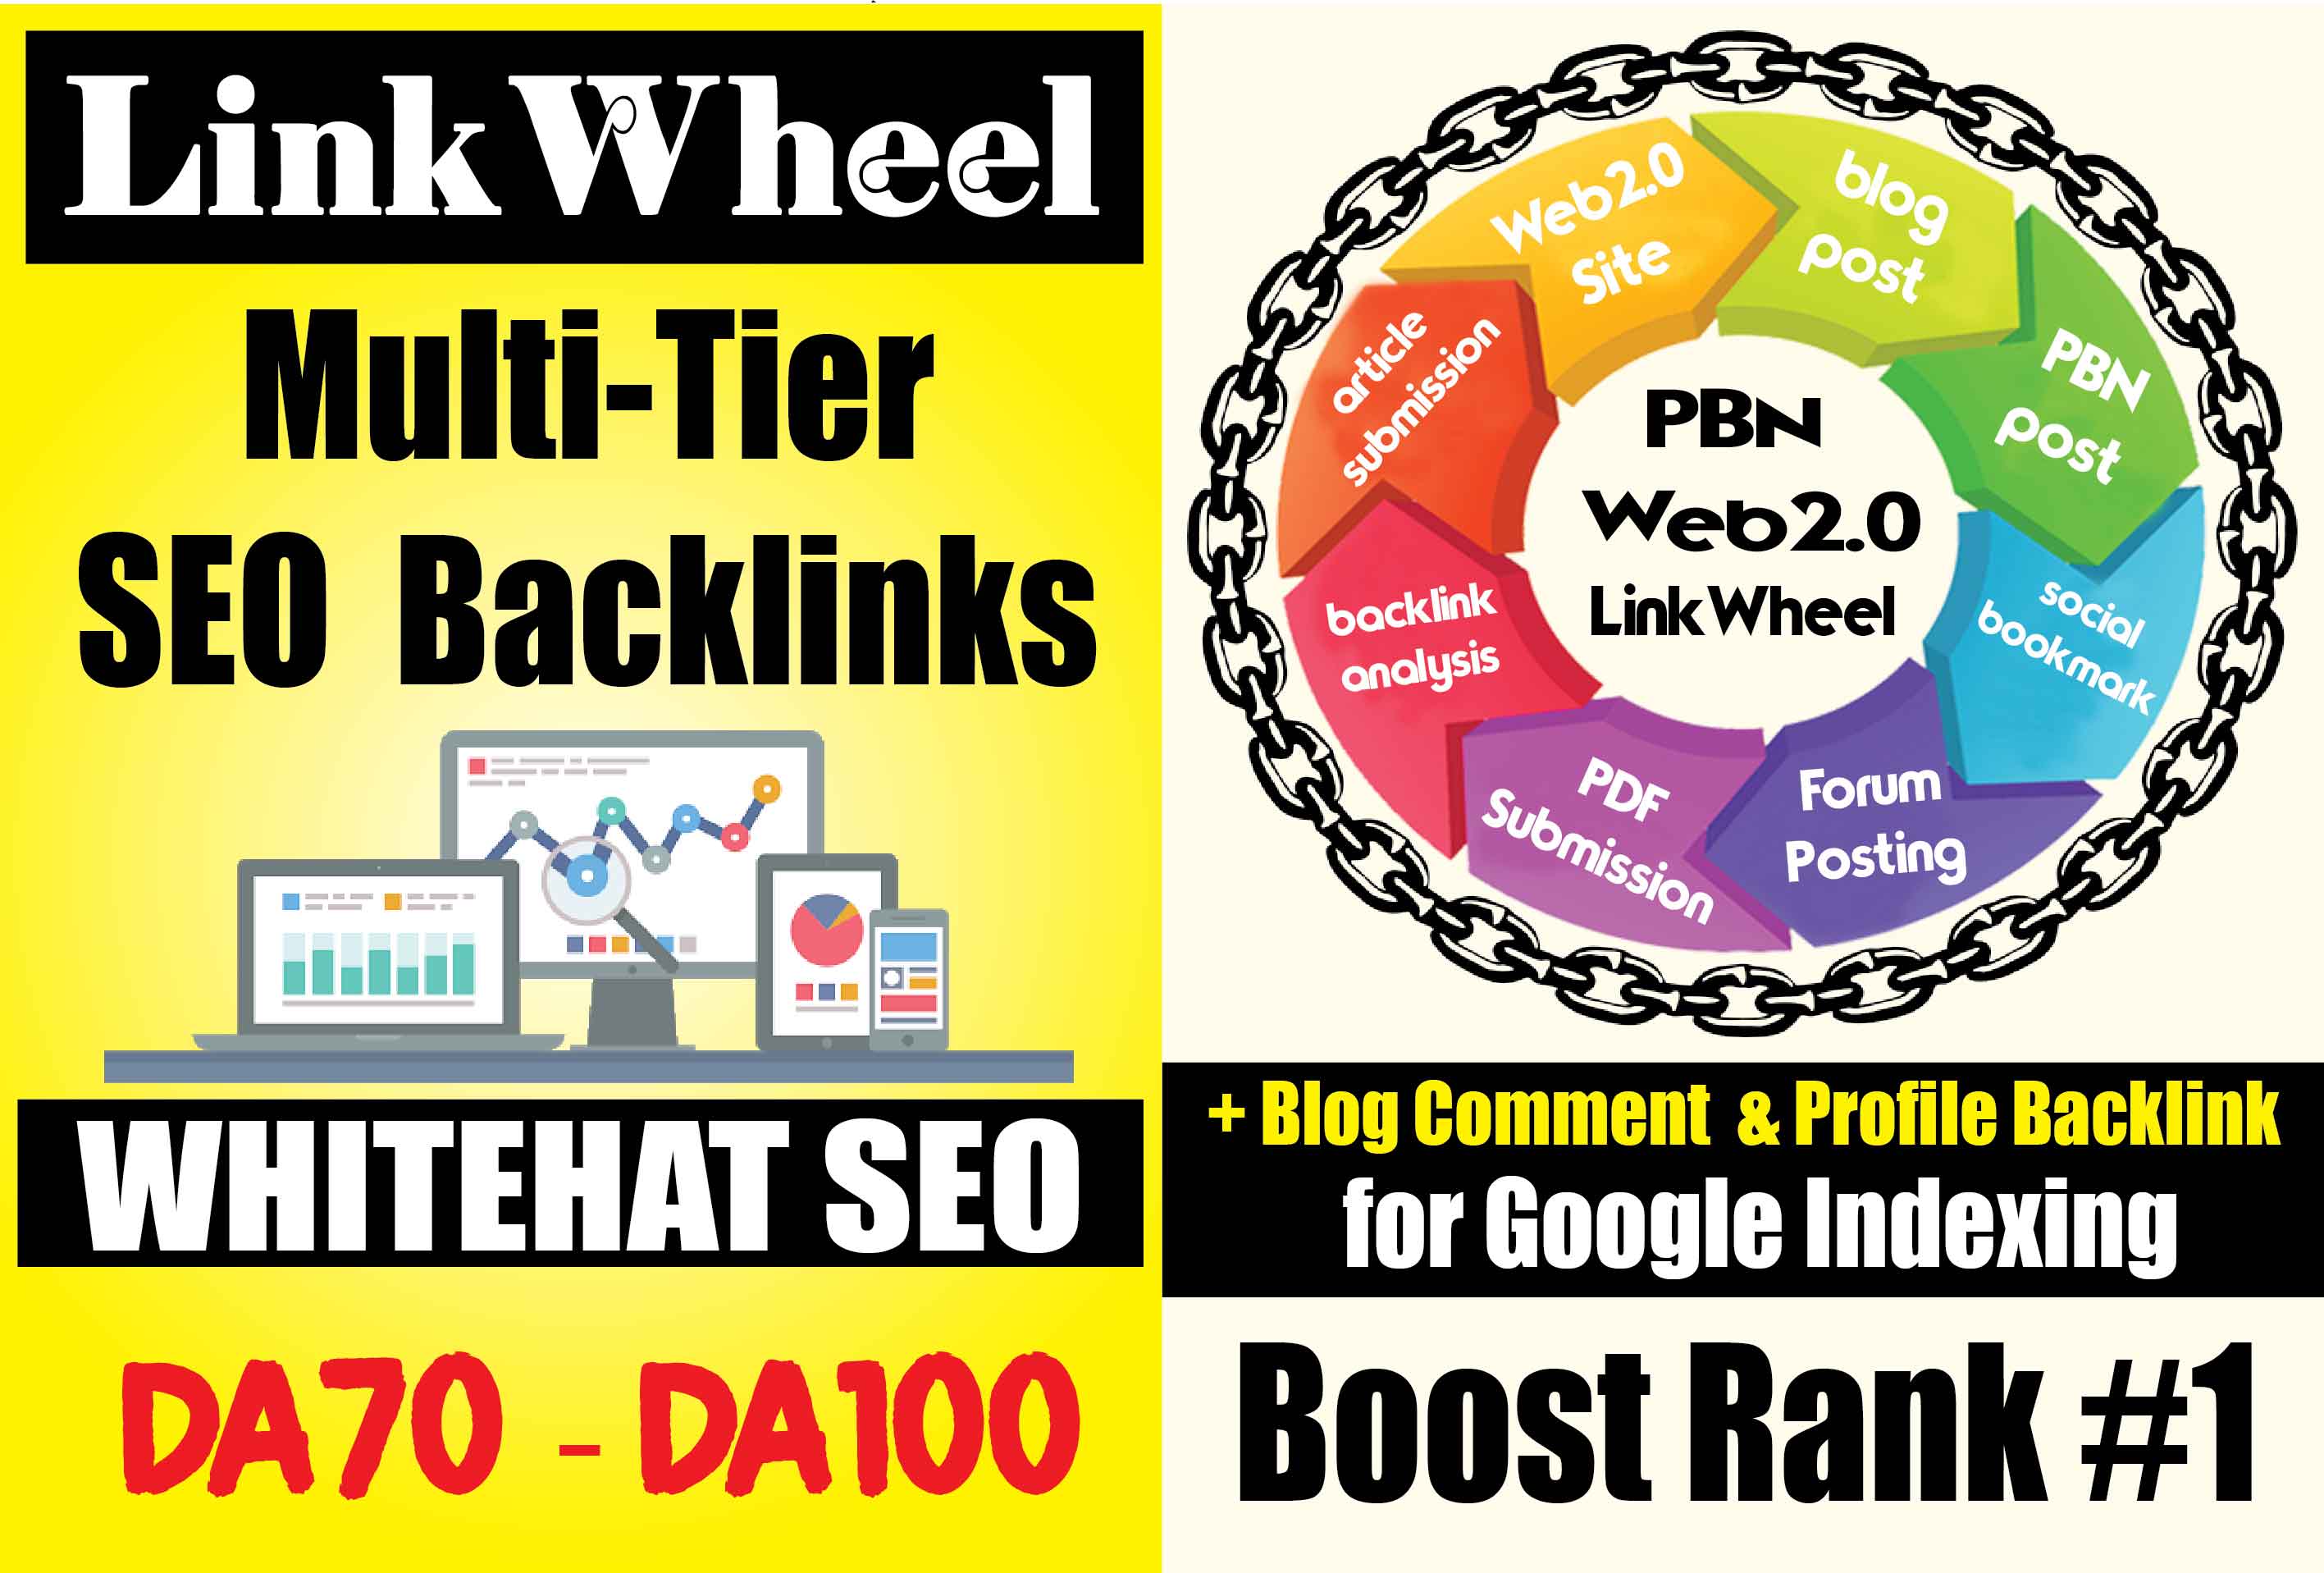 Get 300 Massive Manual LinkWheel SEO Backlinks for Google First Page Ranking